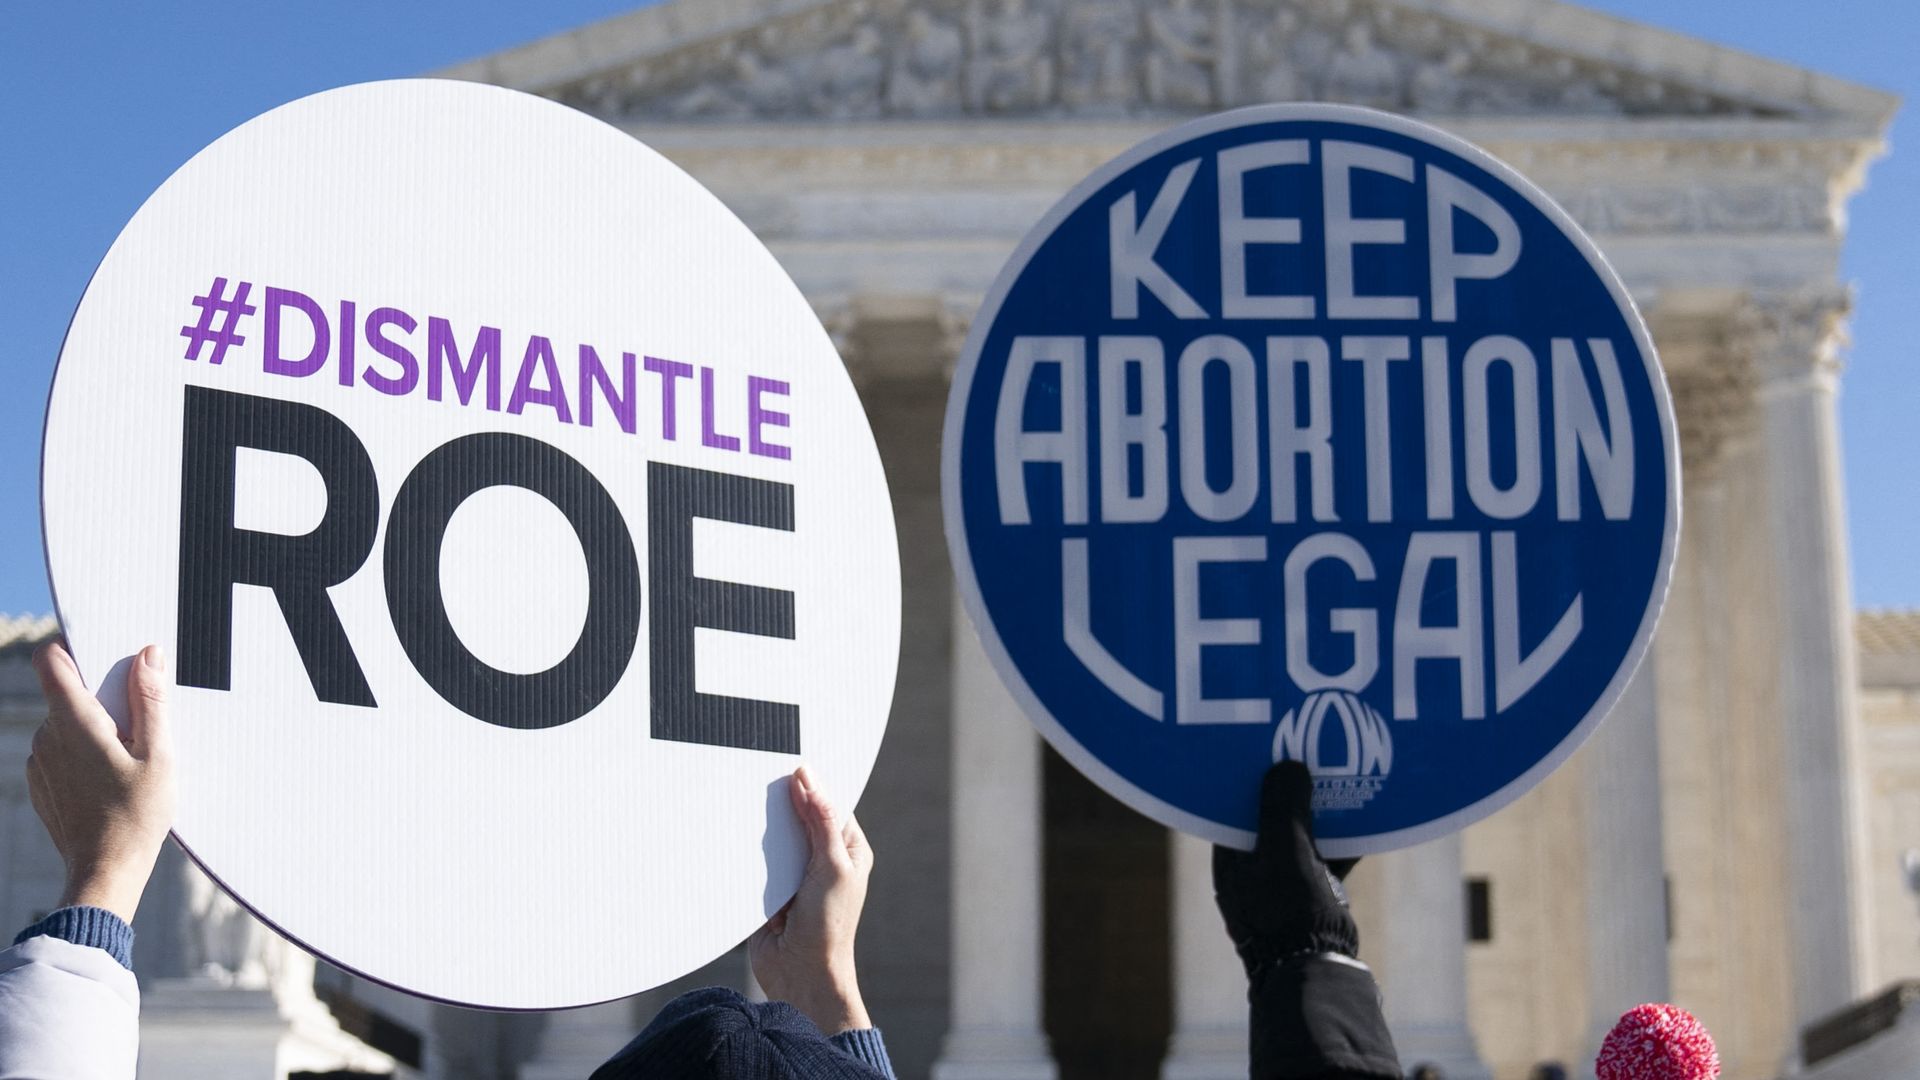 Picture of hands holding signs in front of the Supreme Court, one says "Dismantle Roe" and the other "Keep abortion legal"